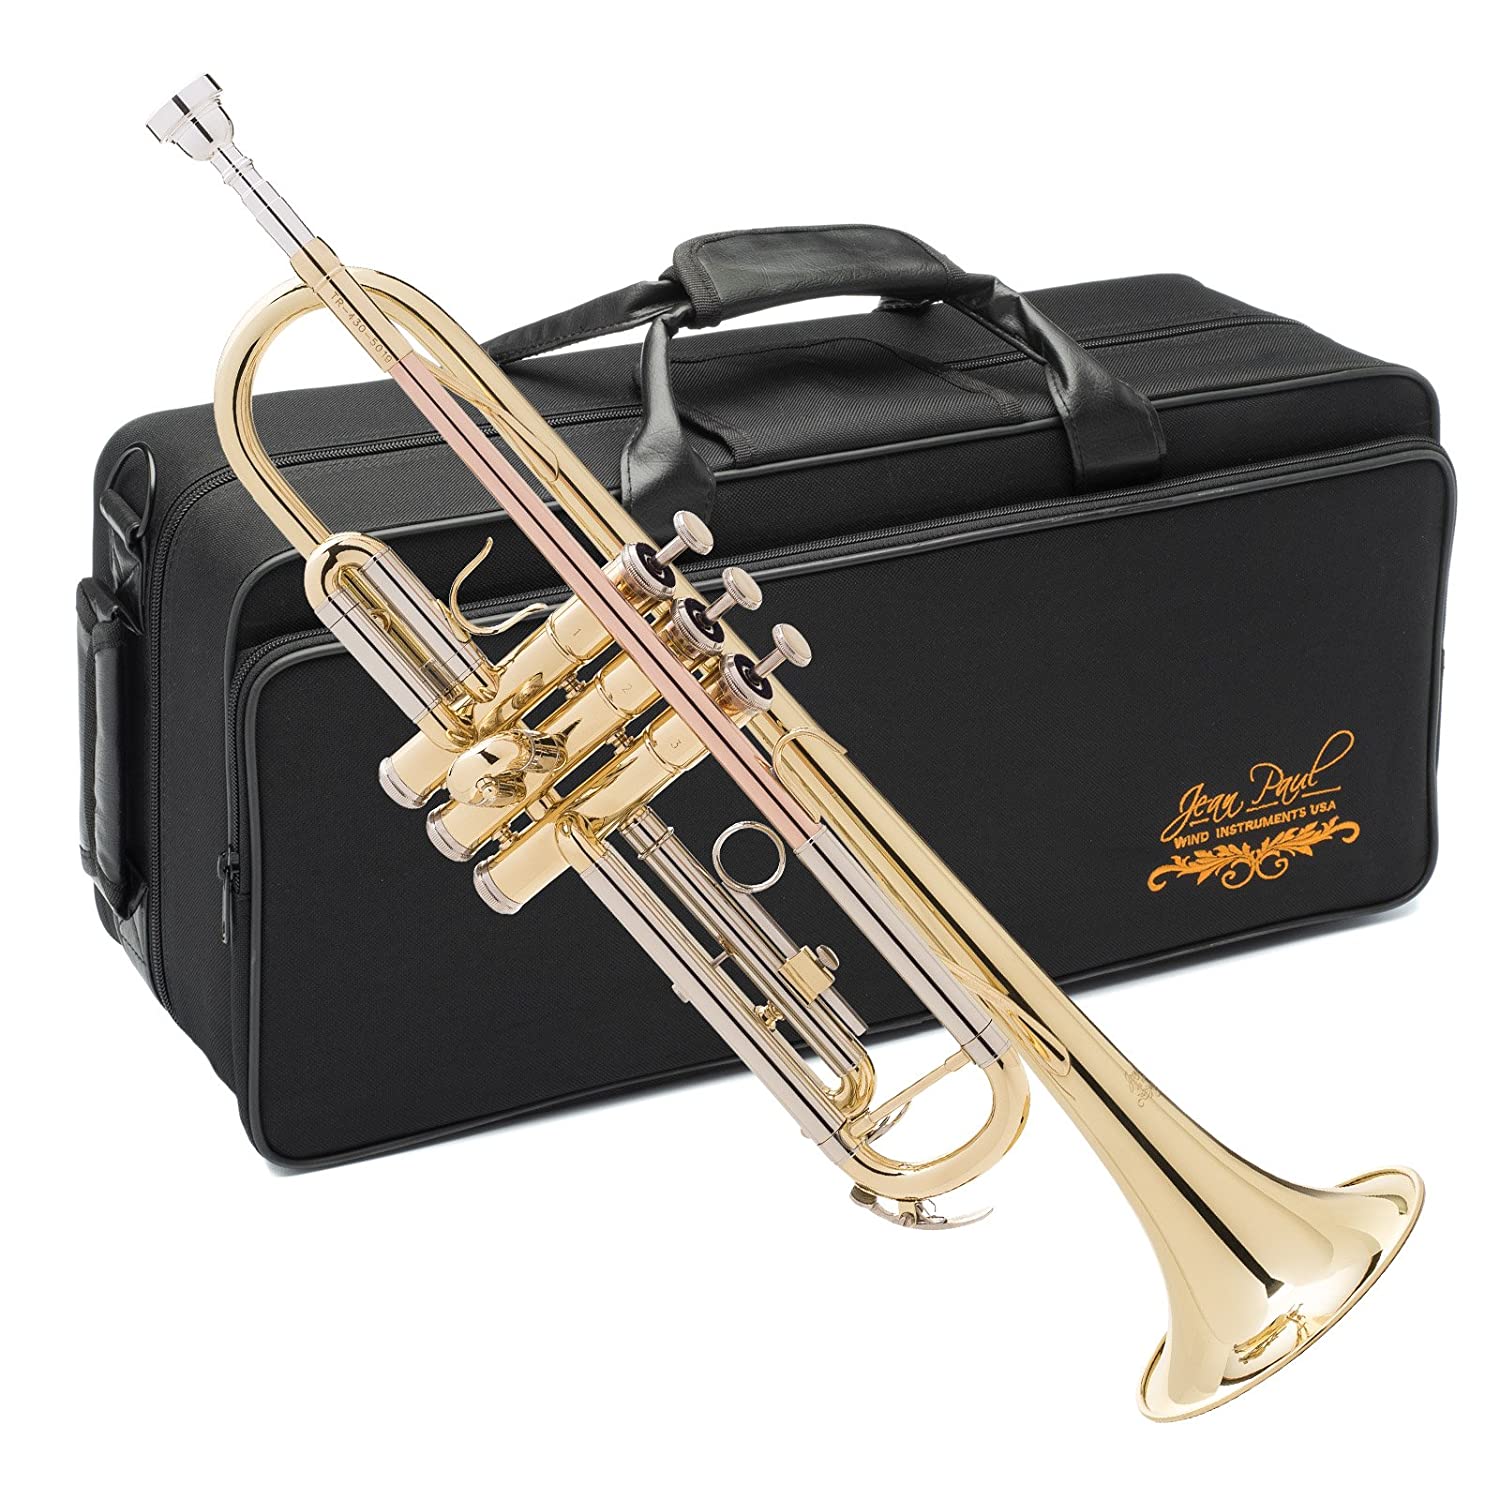 10 Best Trumpets for Kids 2022 - Buying Guide & Reviews 6